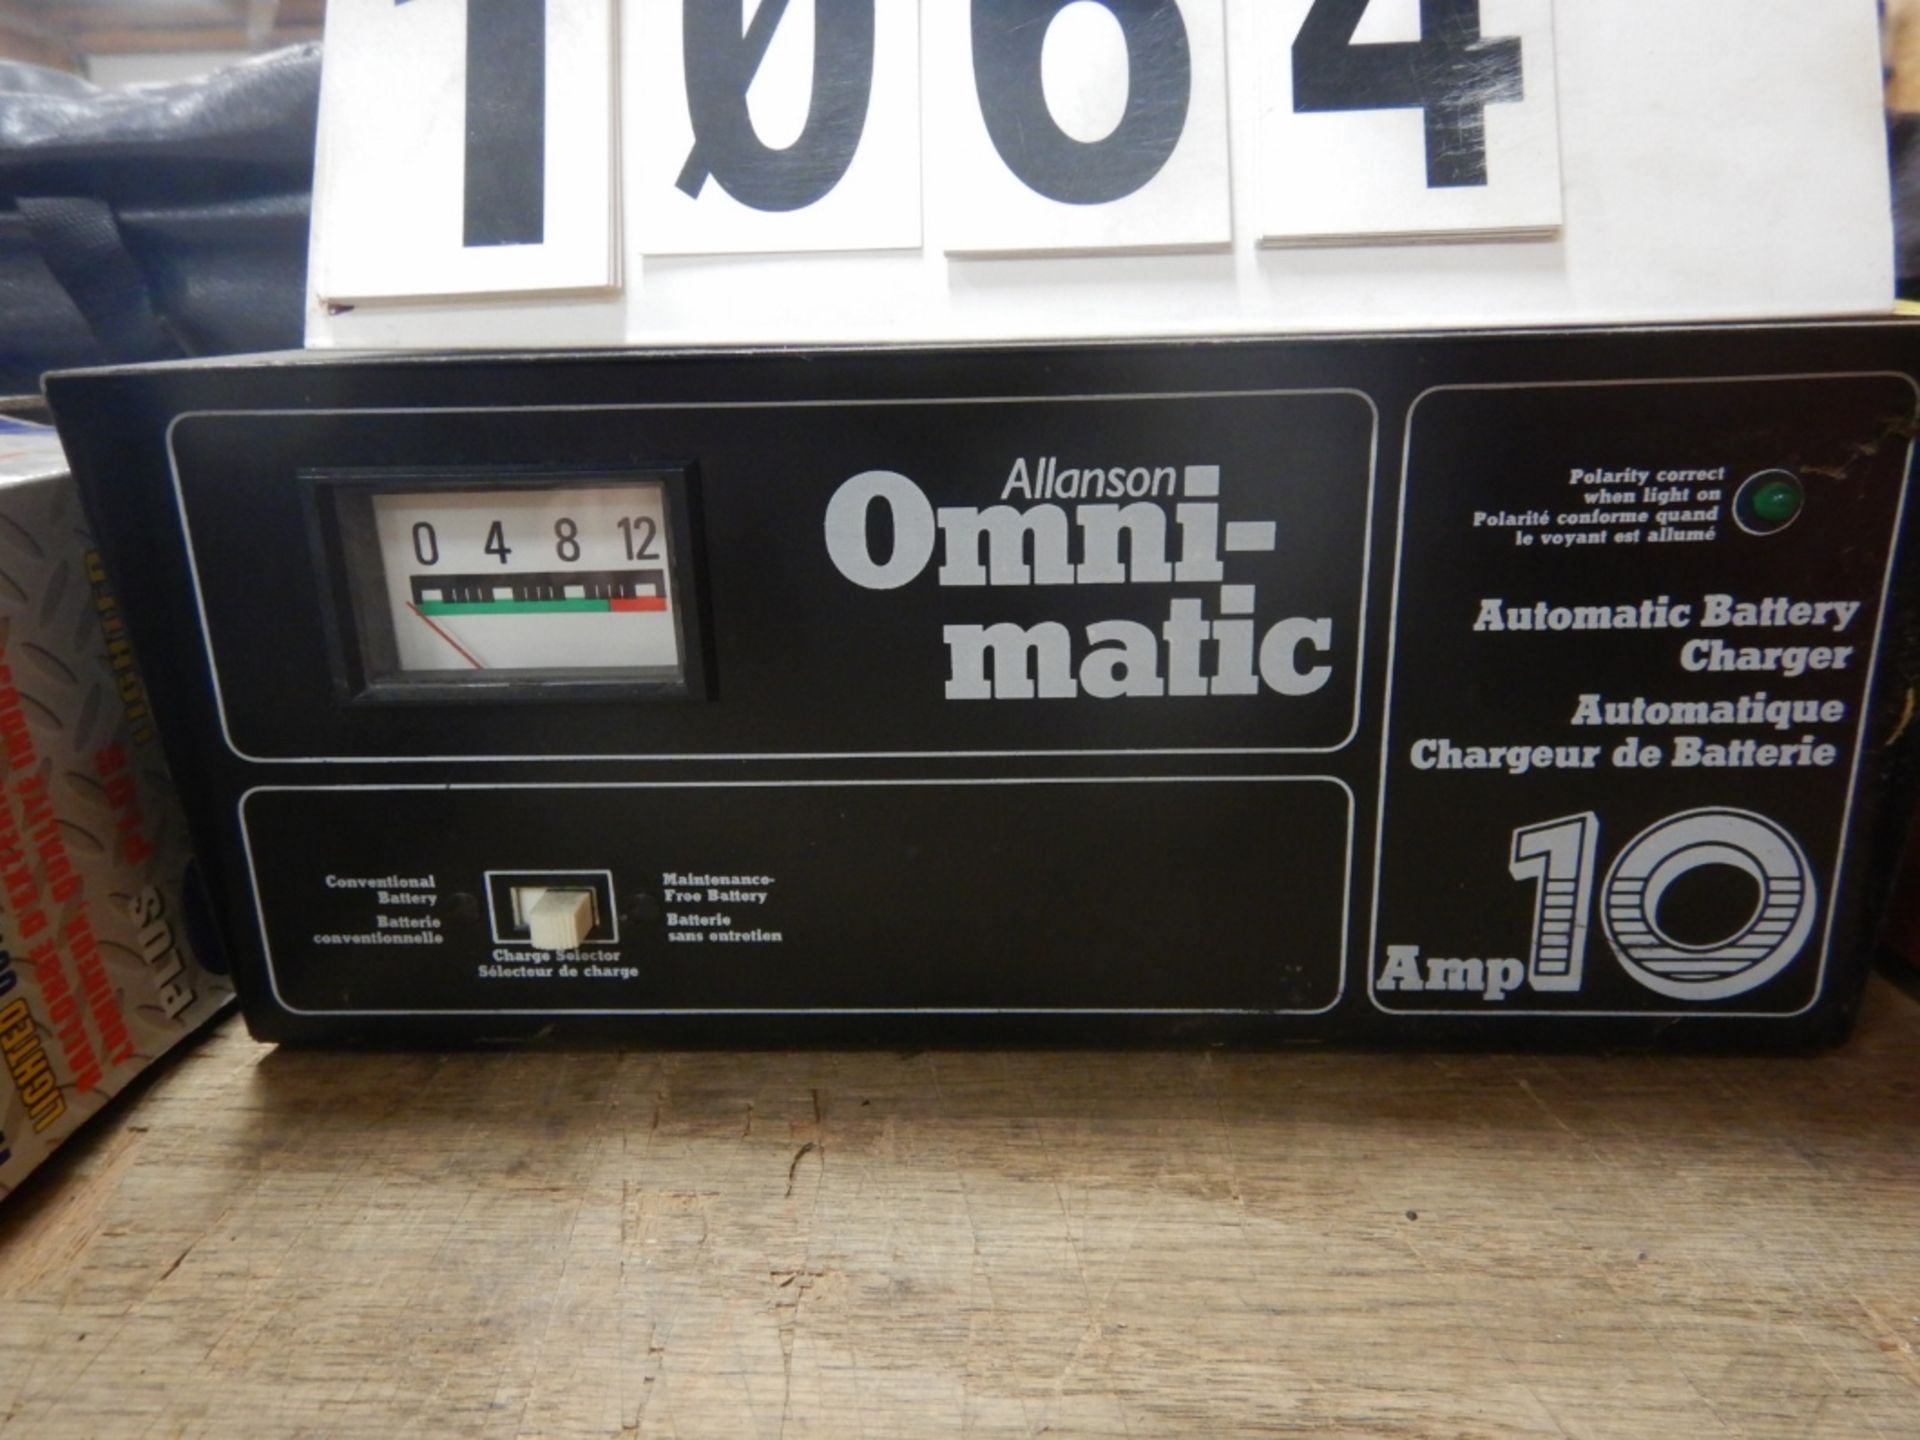 OMNI-MATIC AUTOMATIC BATTERY CHARGER - 10 AMP - Image 2 of 2